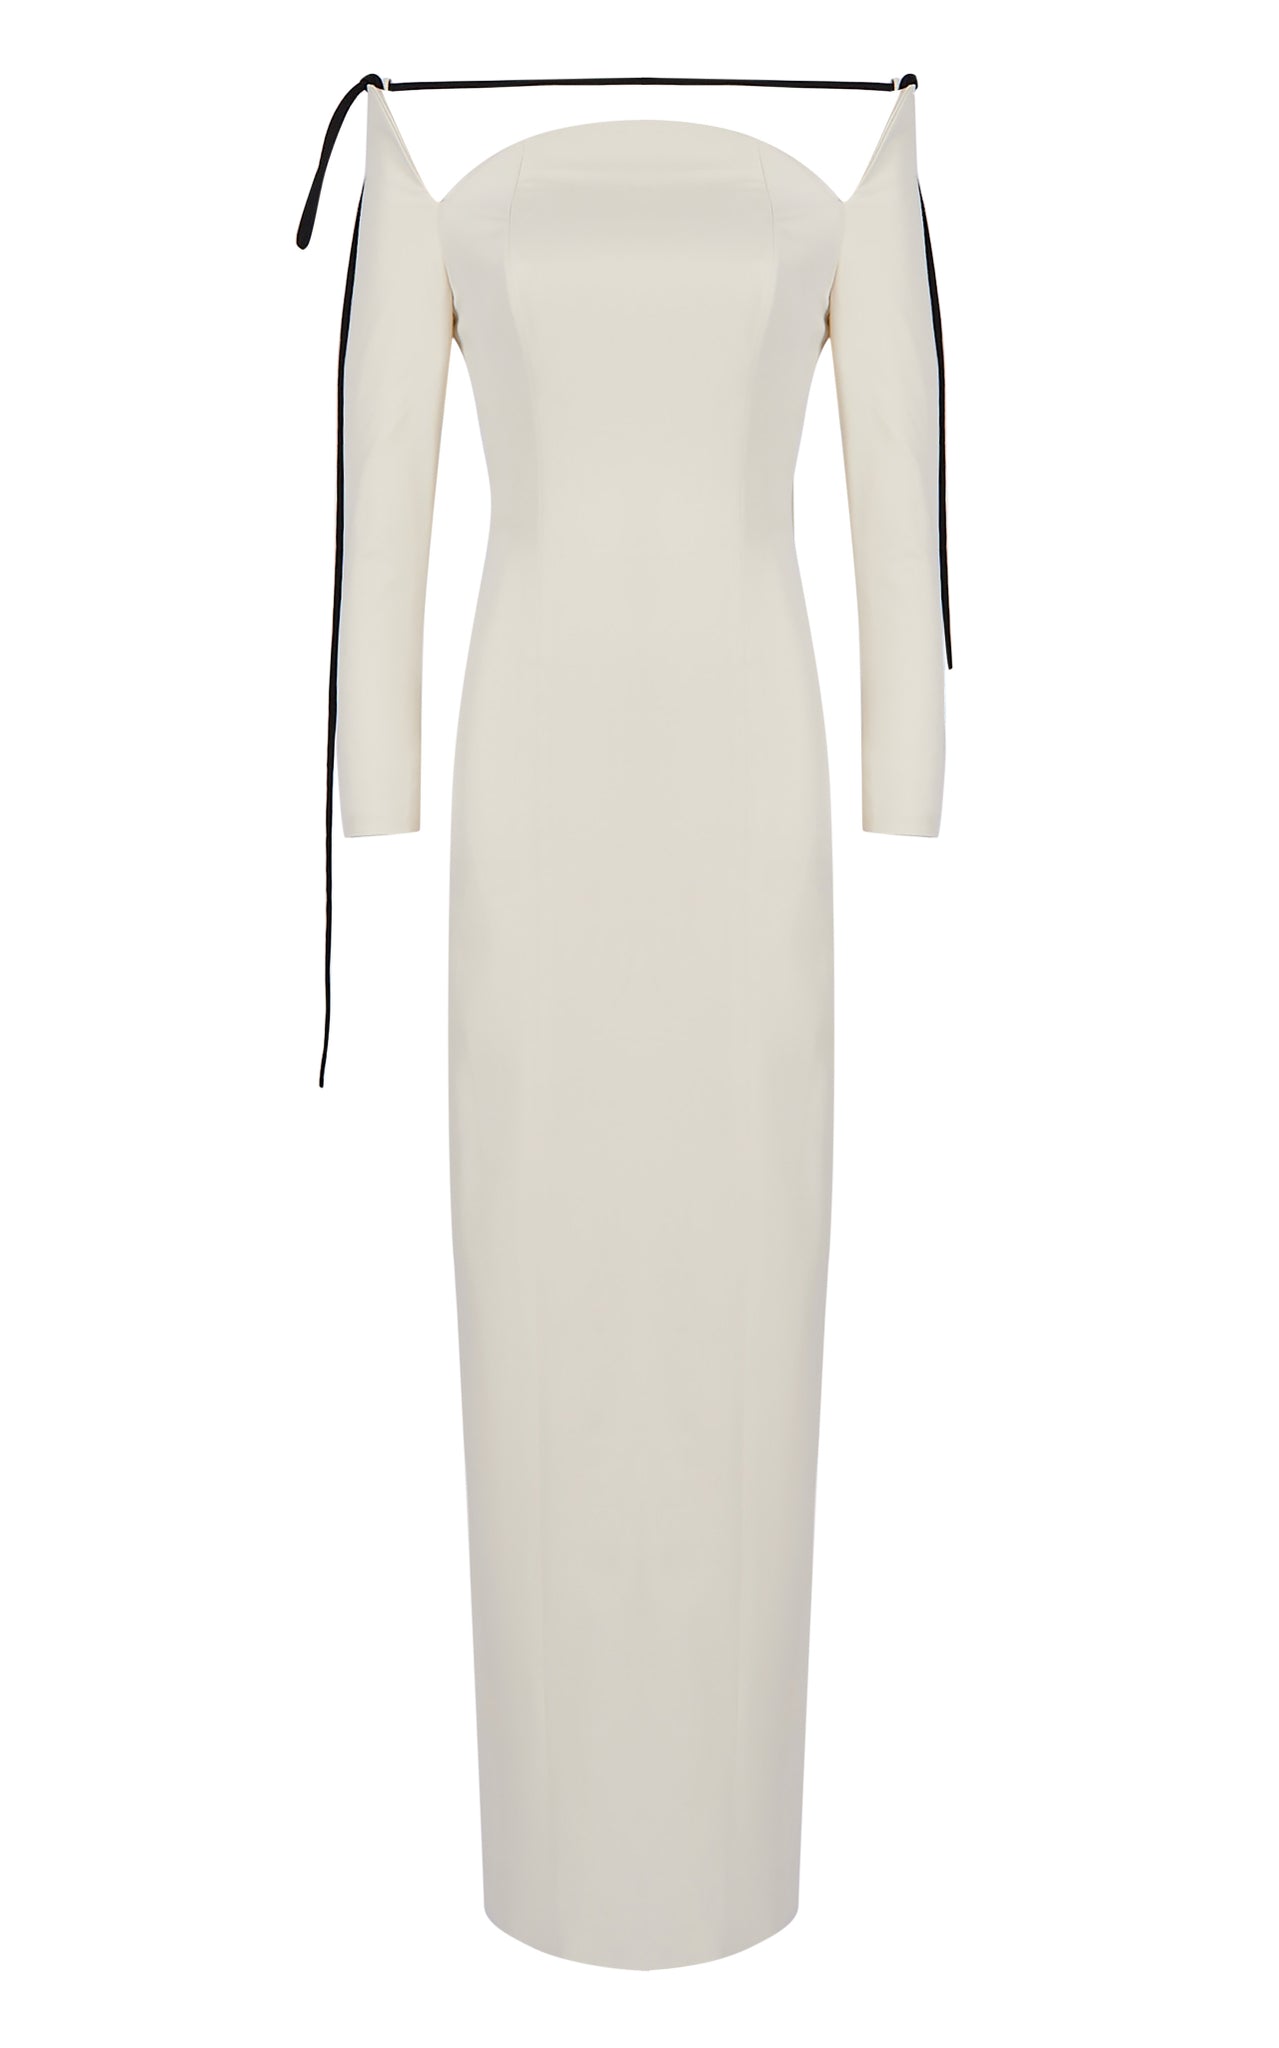 Column Gown with Contrast Neck Strap